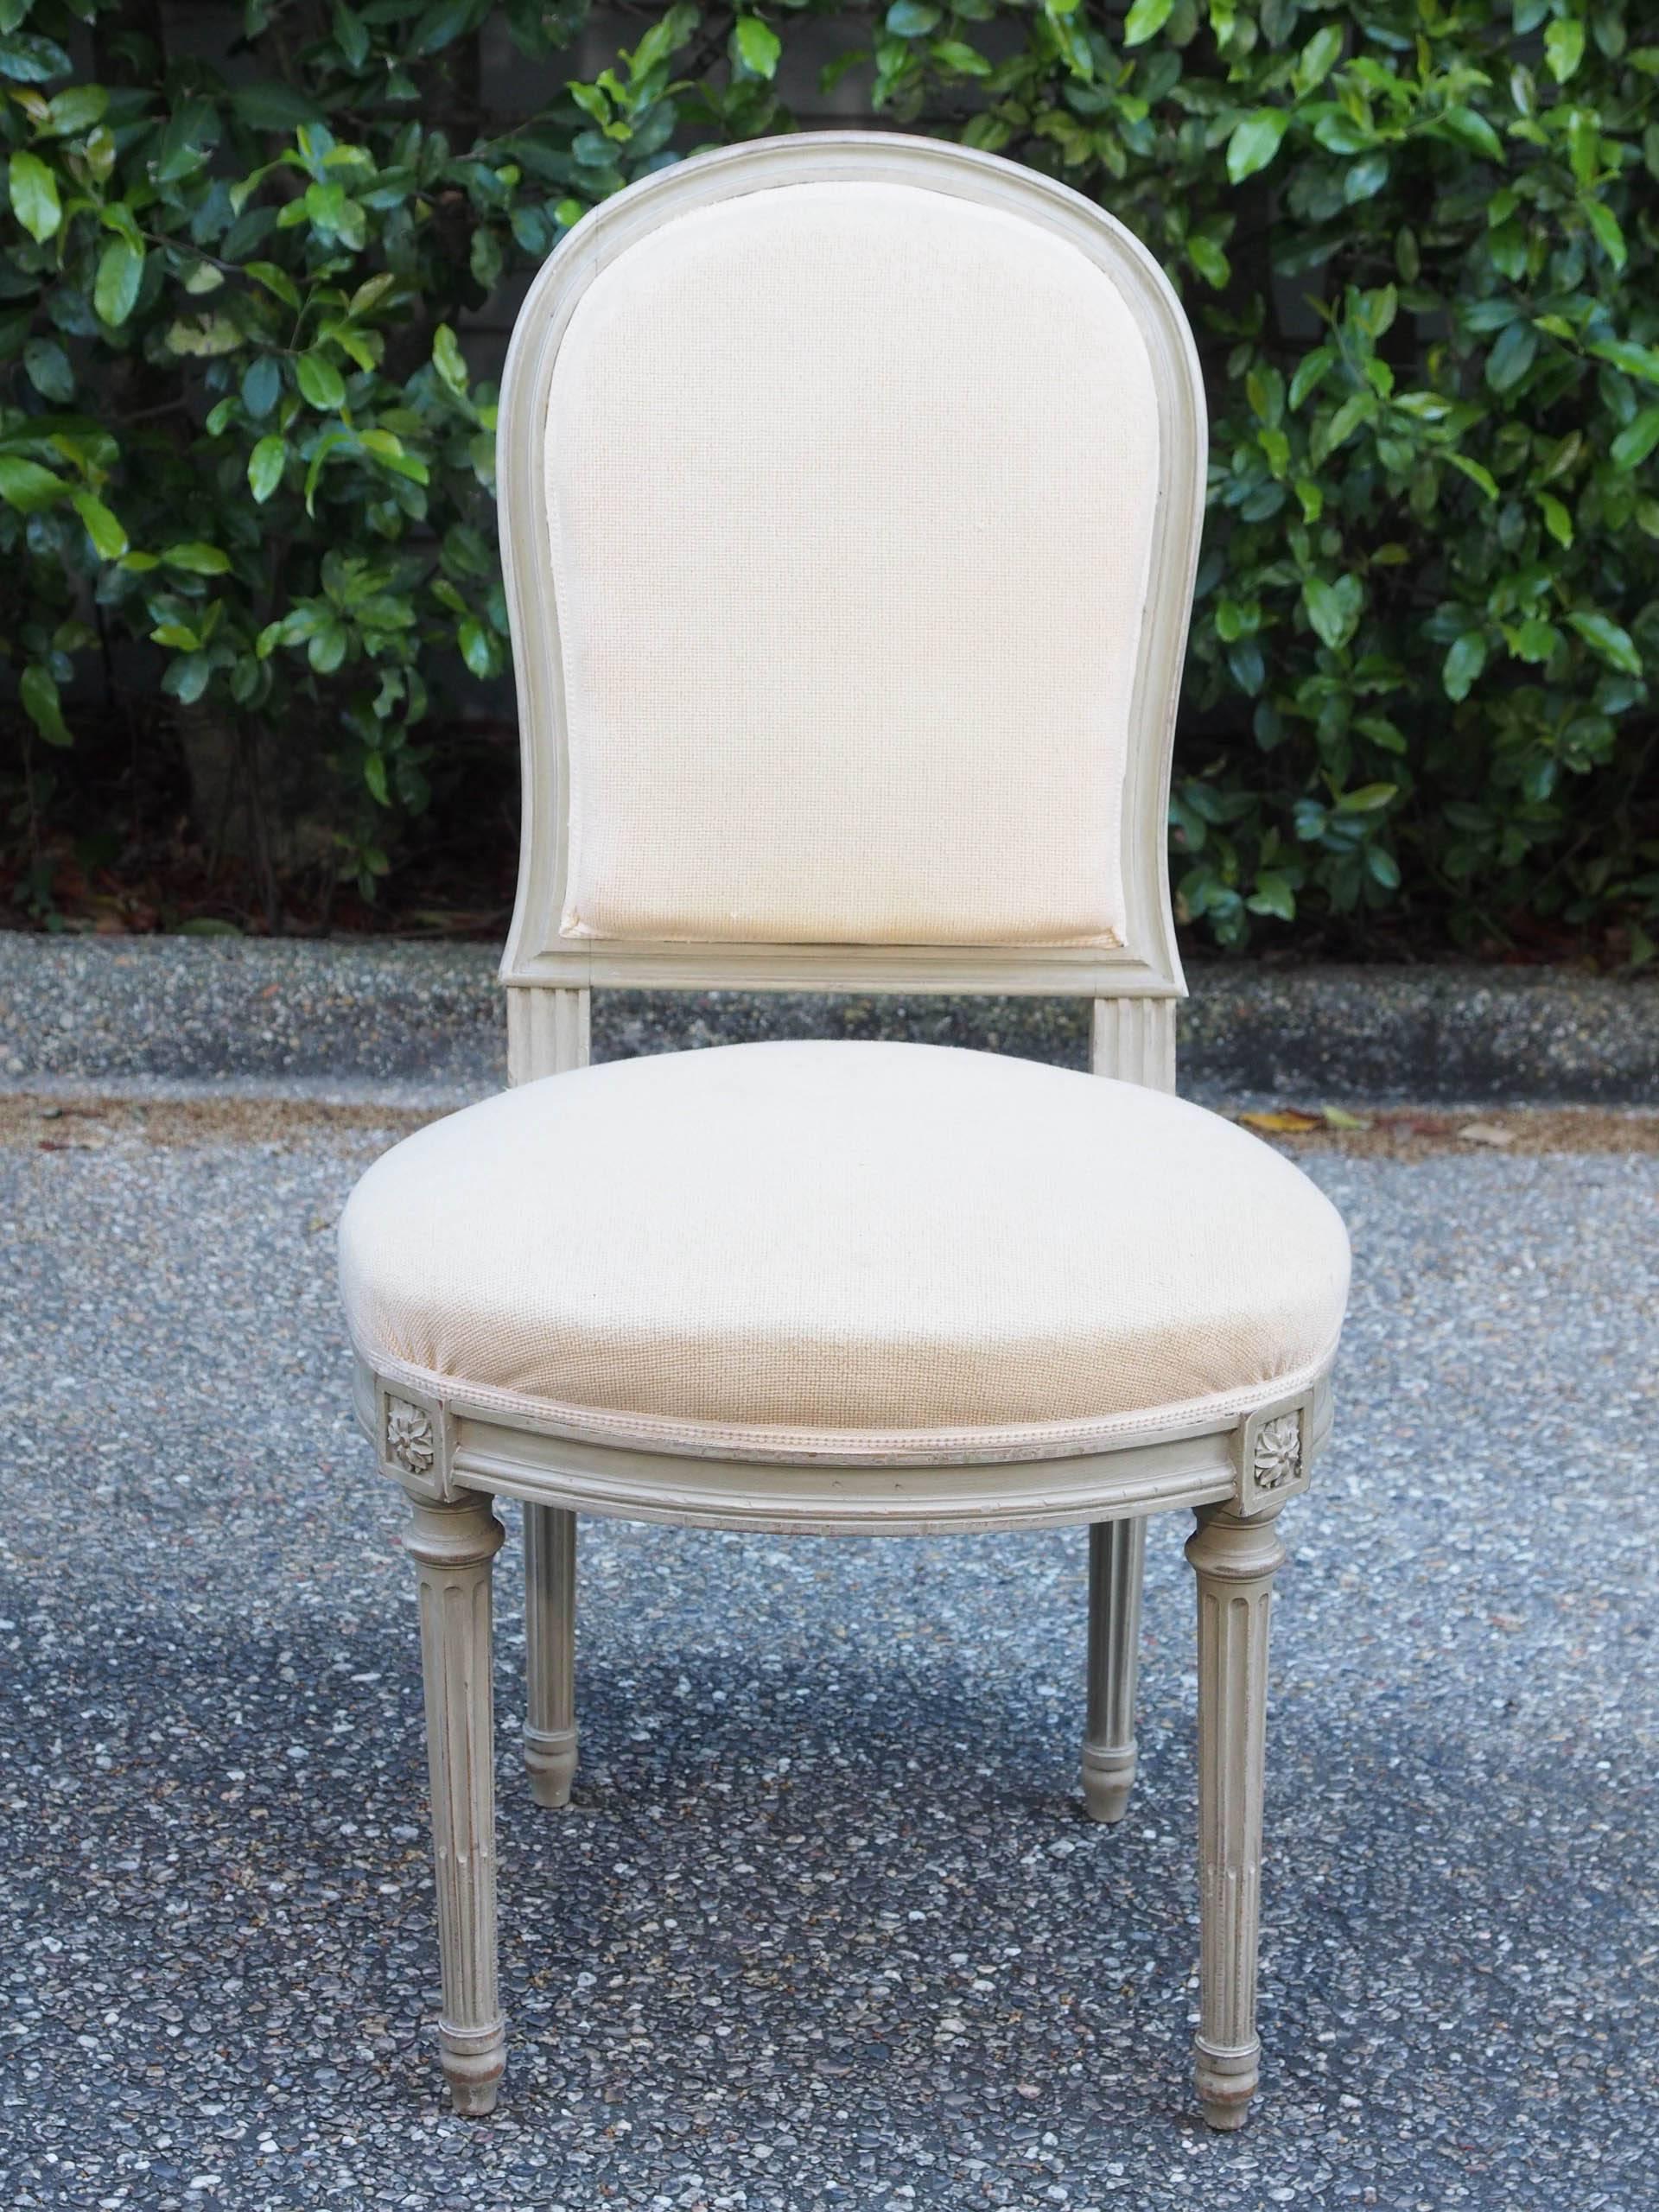 French Louis XVI style carved and painted dining chairs with arched backs over shaped seats.